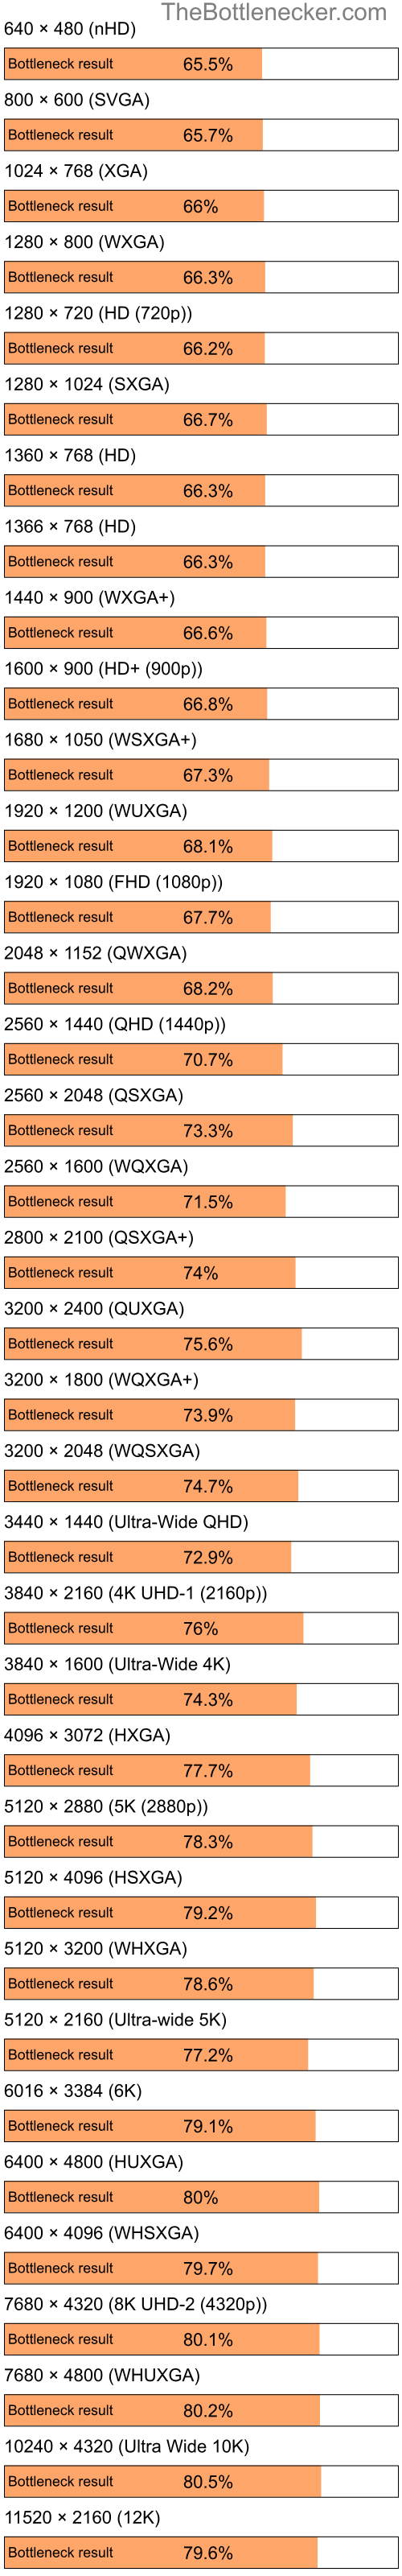 Bottleneck results by resolution for Intel Celeron and AMD Mobility Radeon HD 4225 in General Tasks